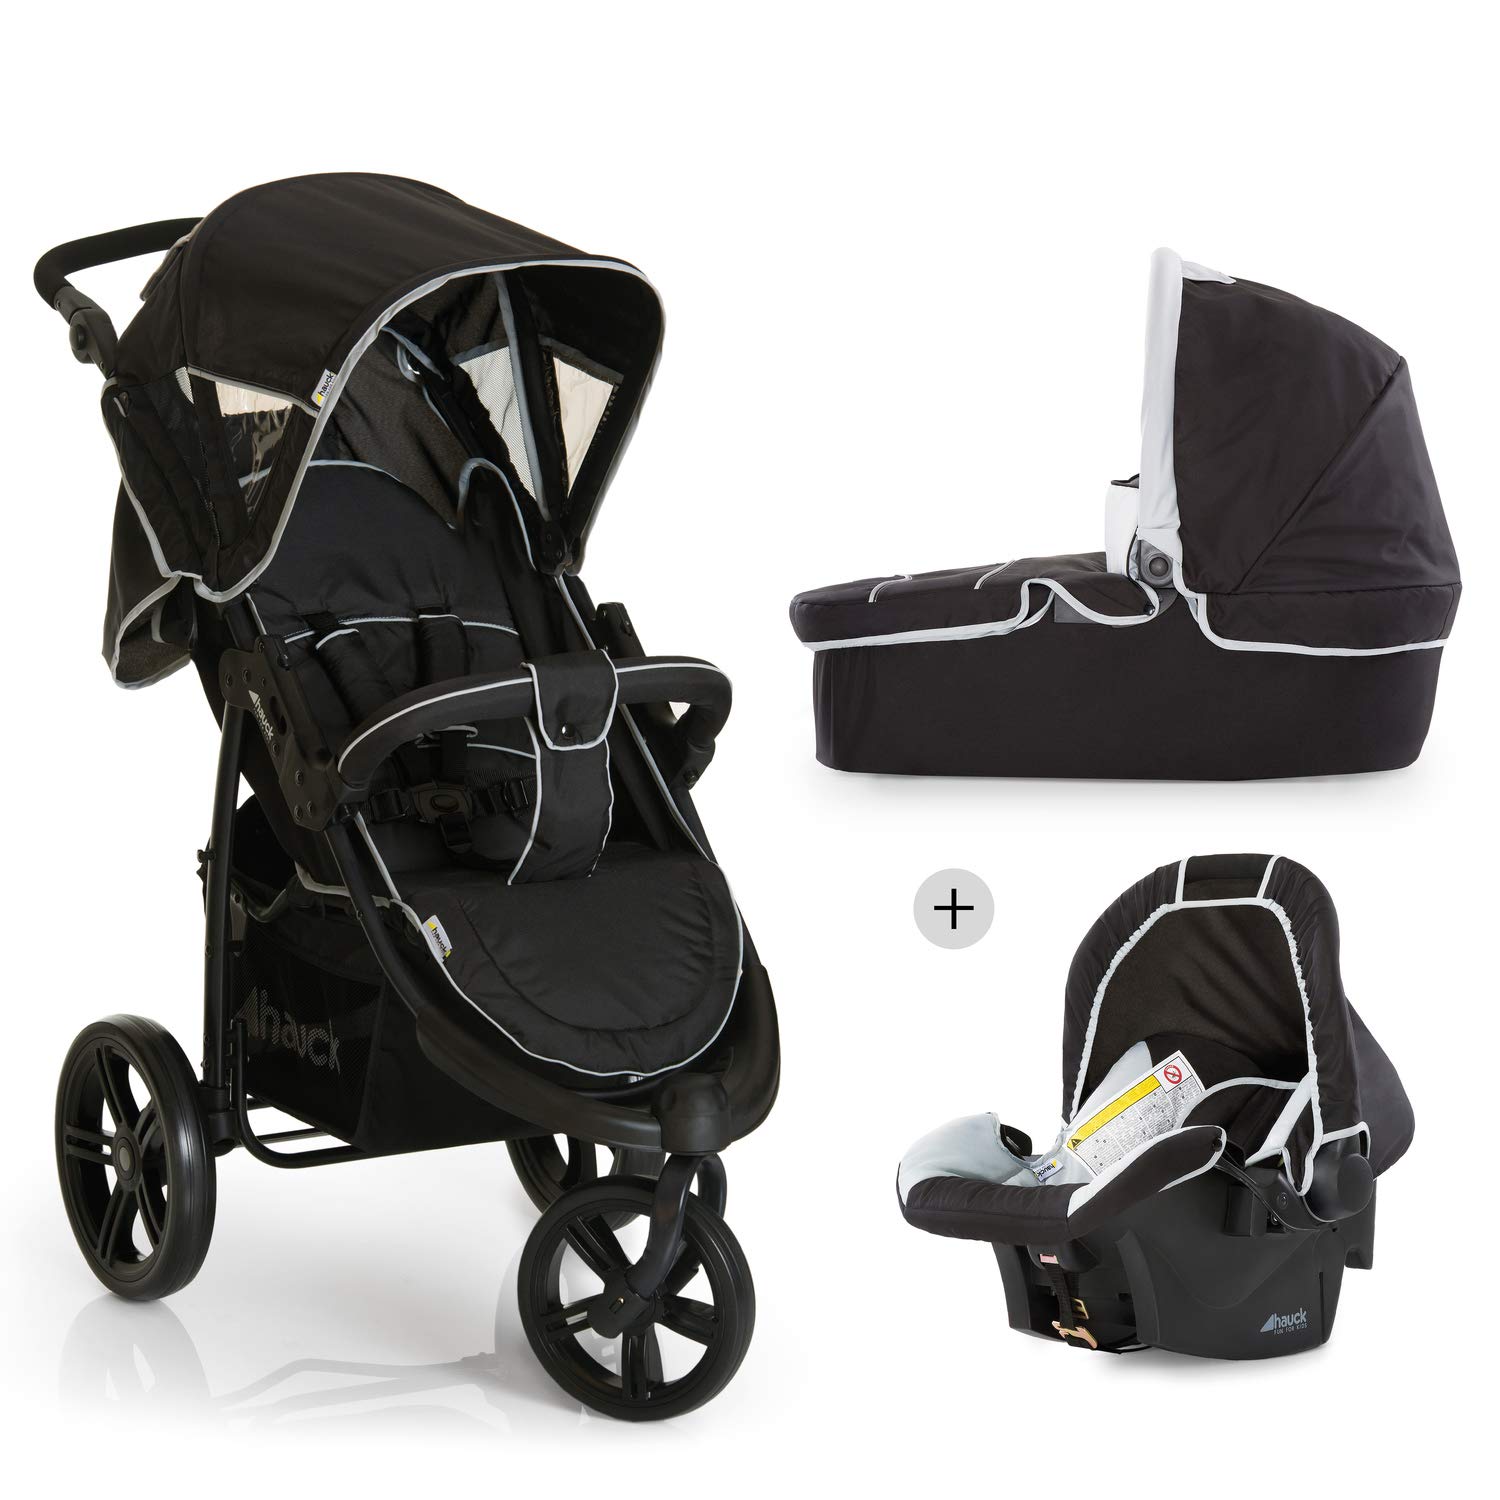 Hauck Viper SLX Trio set, from birth to 15 Kg travel system including car seat, baby seat and rain cover, 3 wheels, black